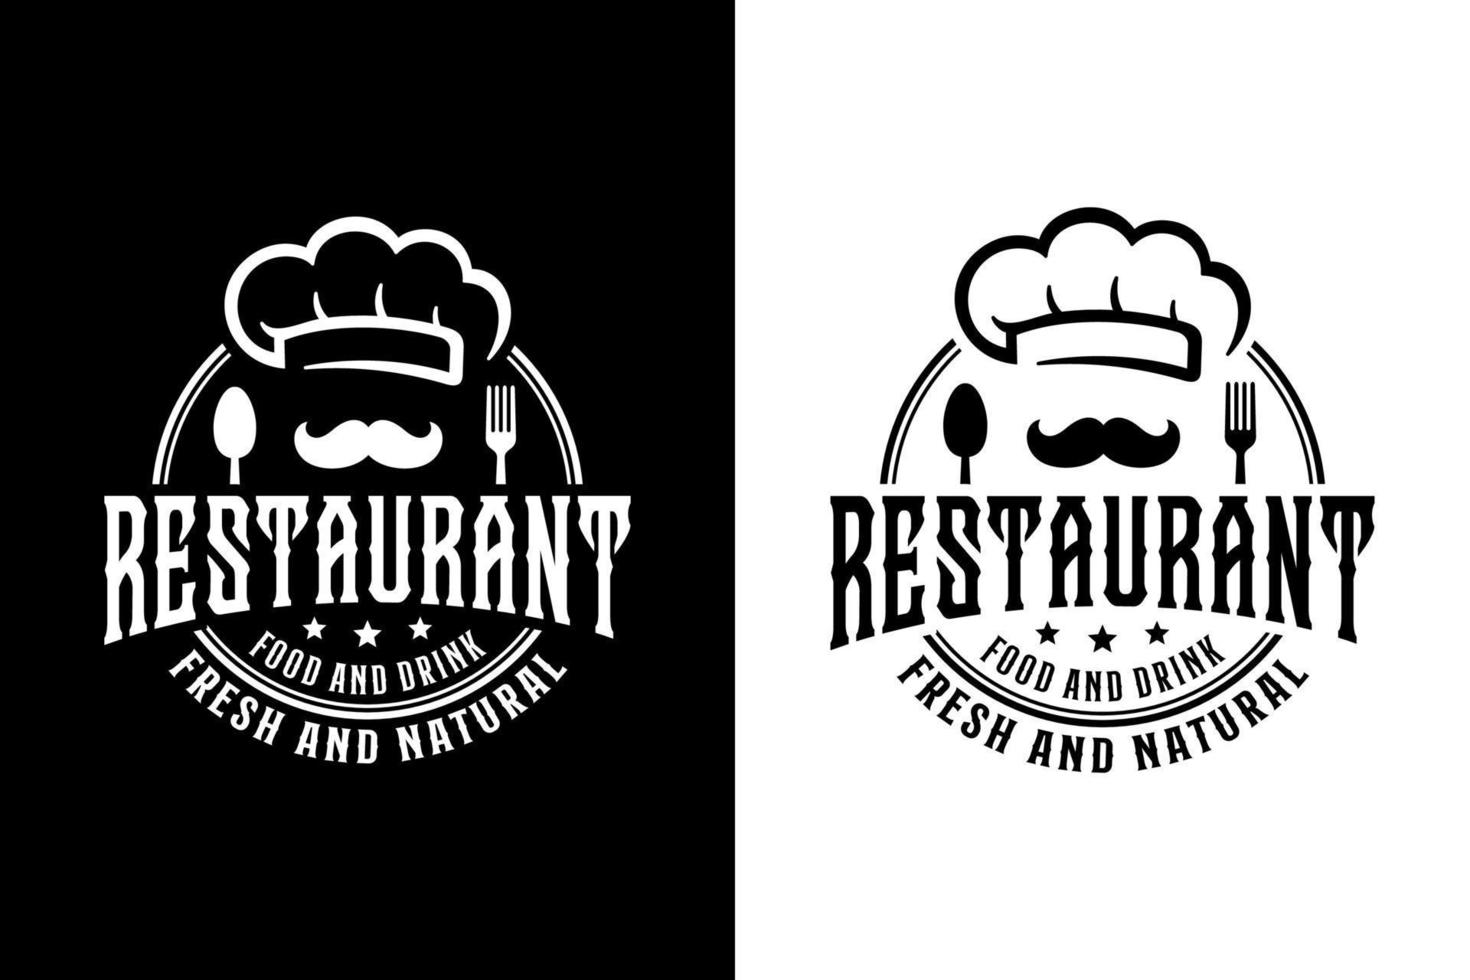 Restaurant food and drink fresh and natural black and white color design logo vector